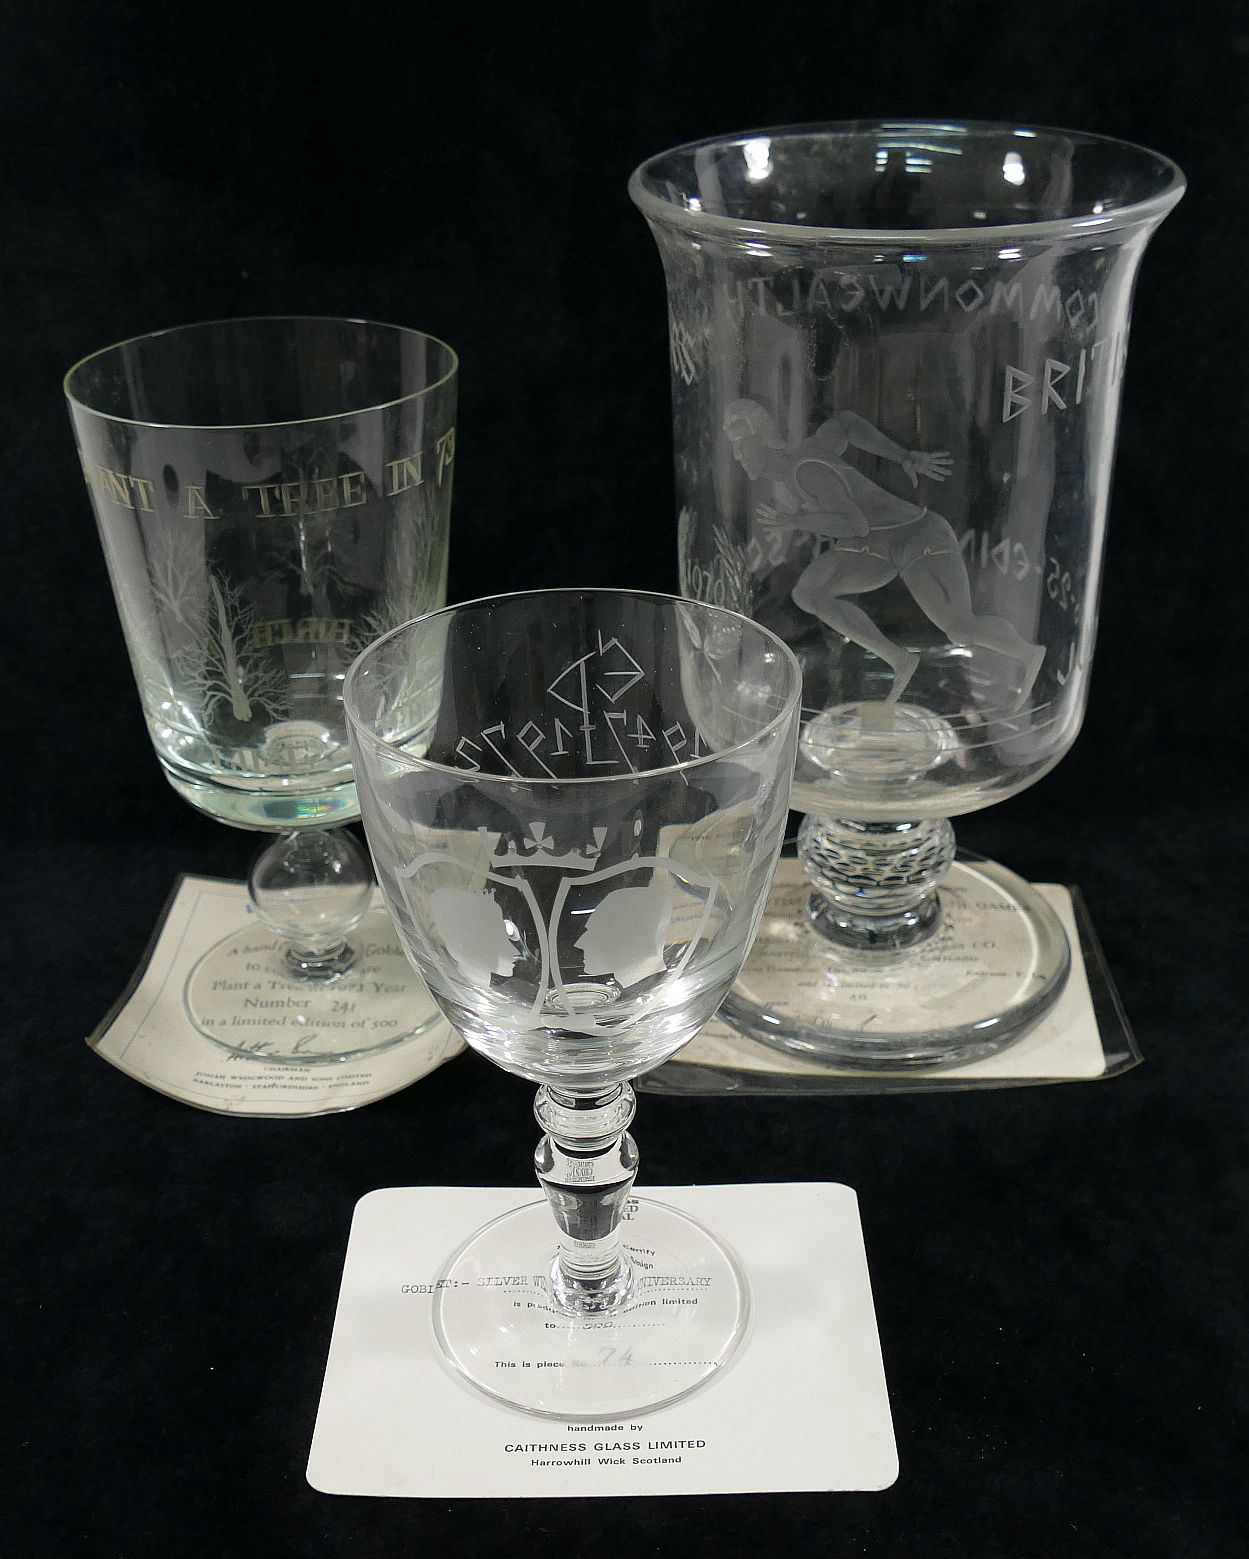 A Caithness limited edition, Royal silver wedding commemorative glass, 16.